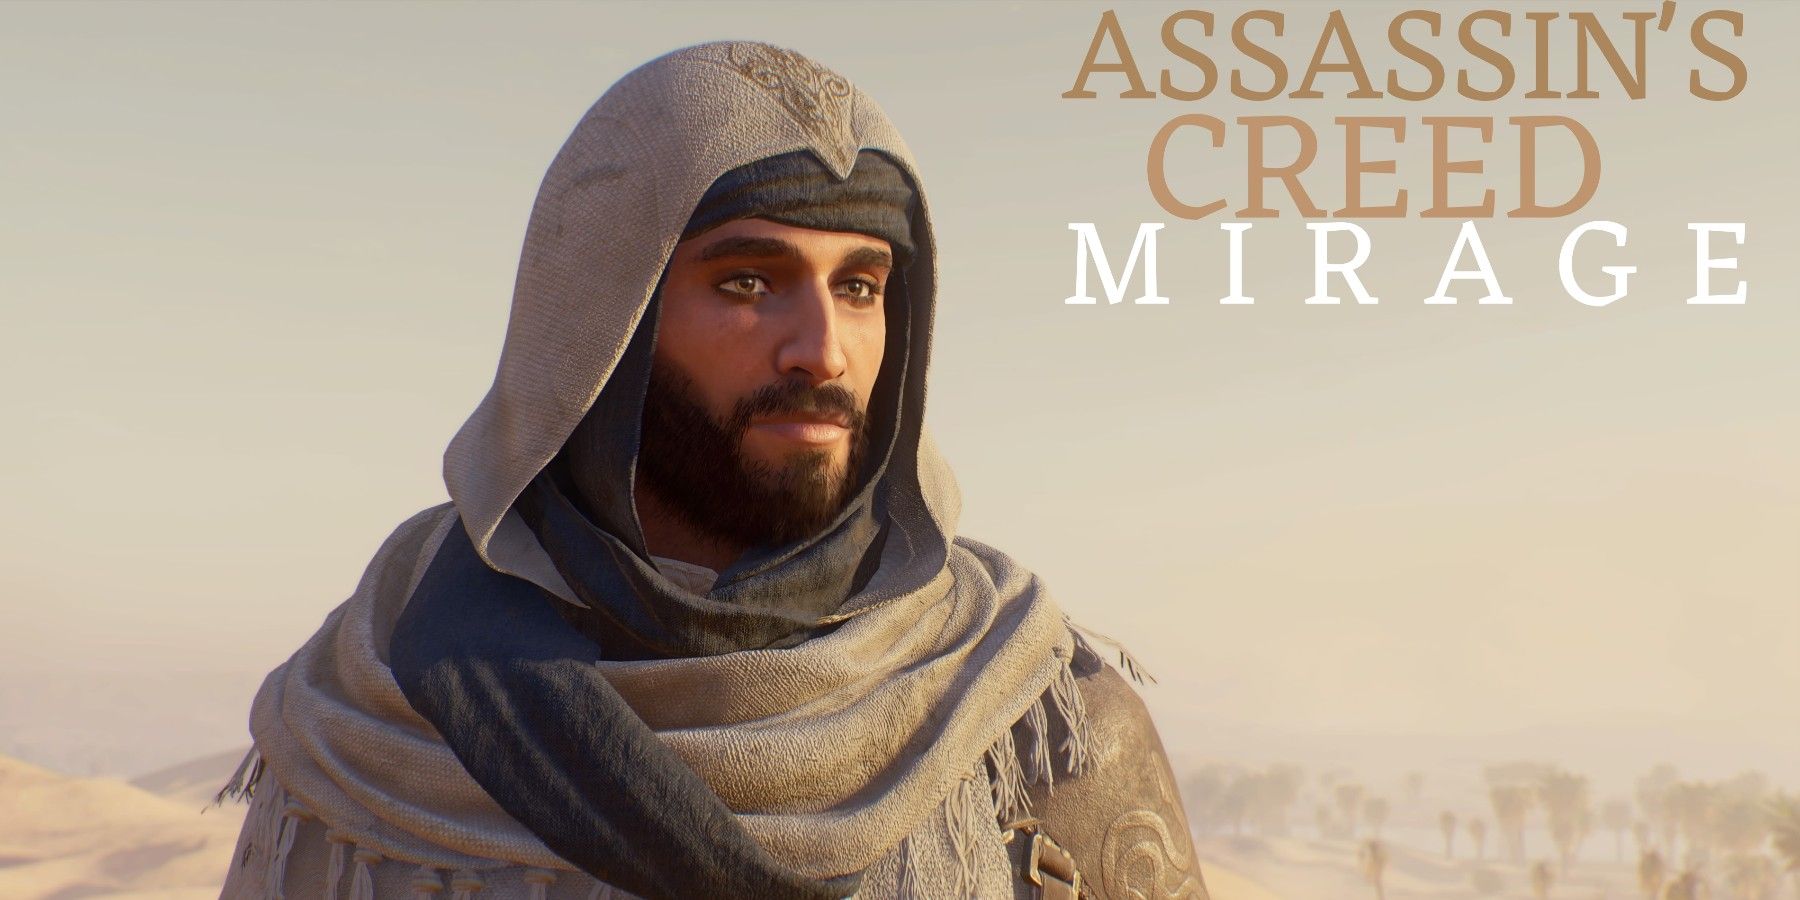 featured Assassins creed mirage ac how to wait and pass time guide